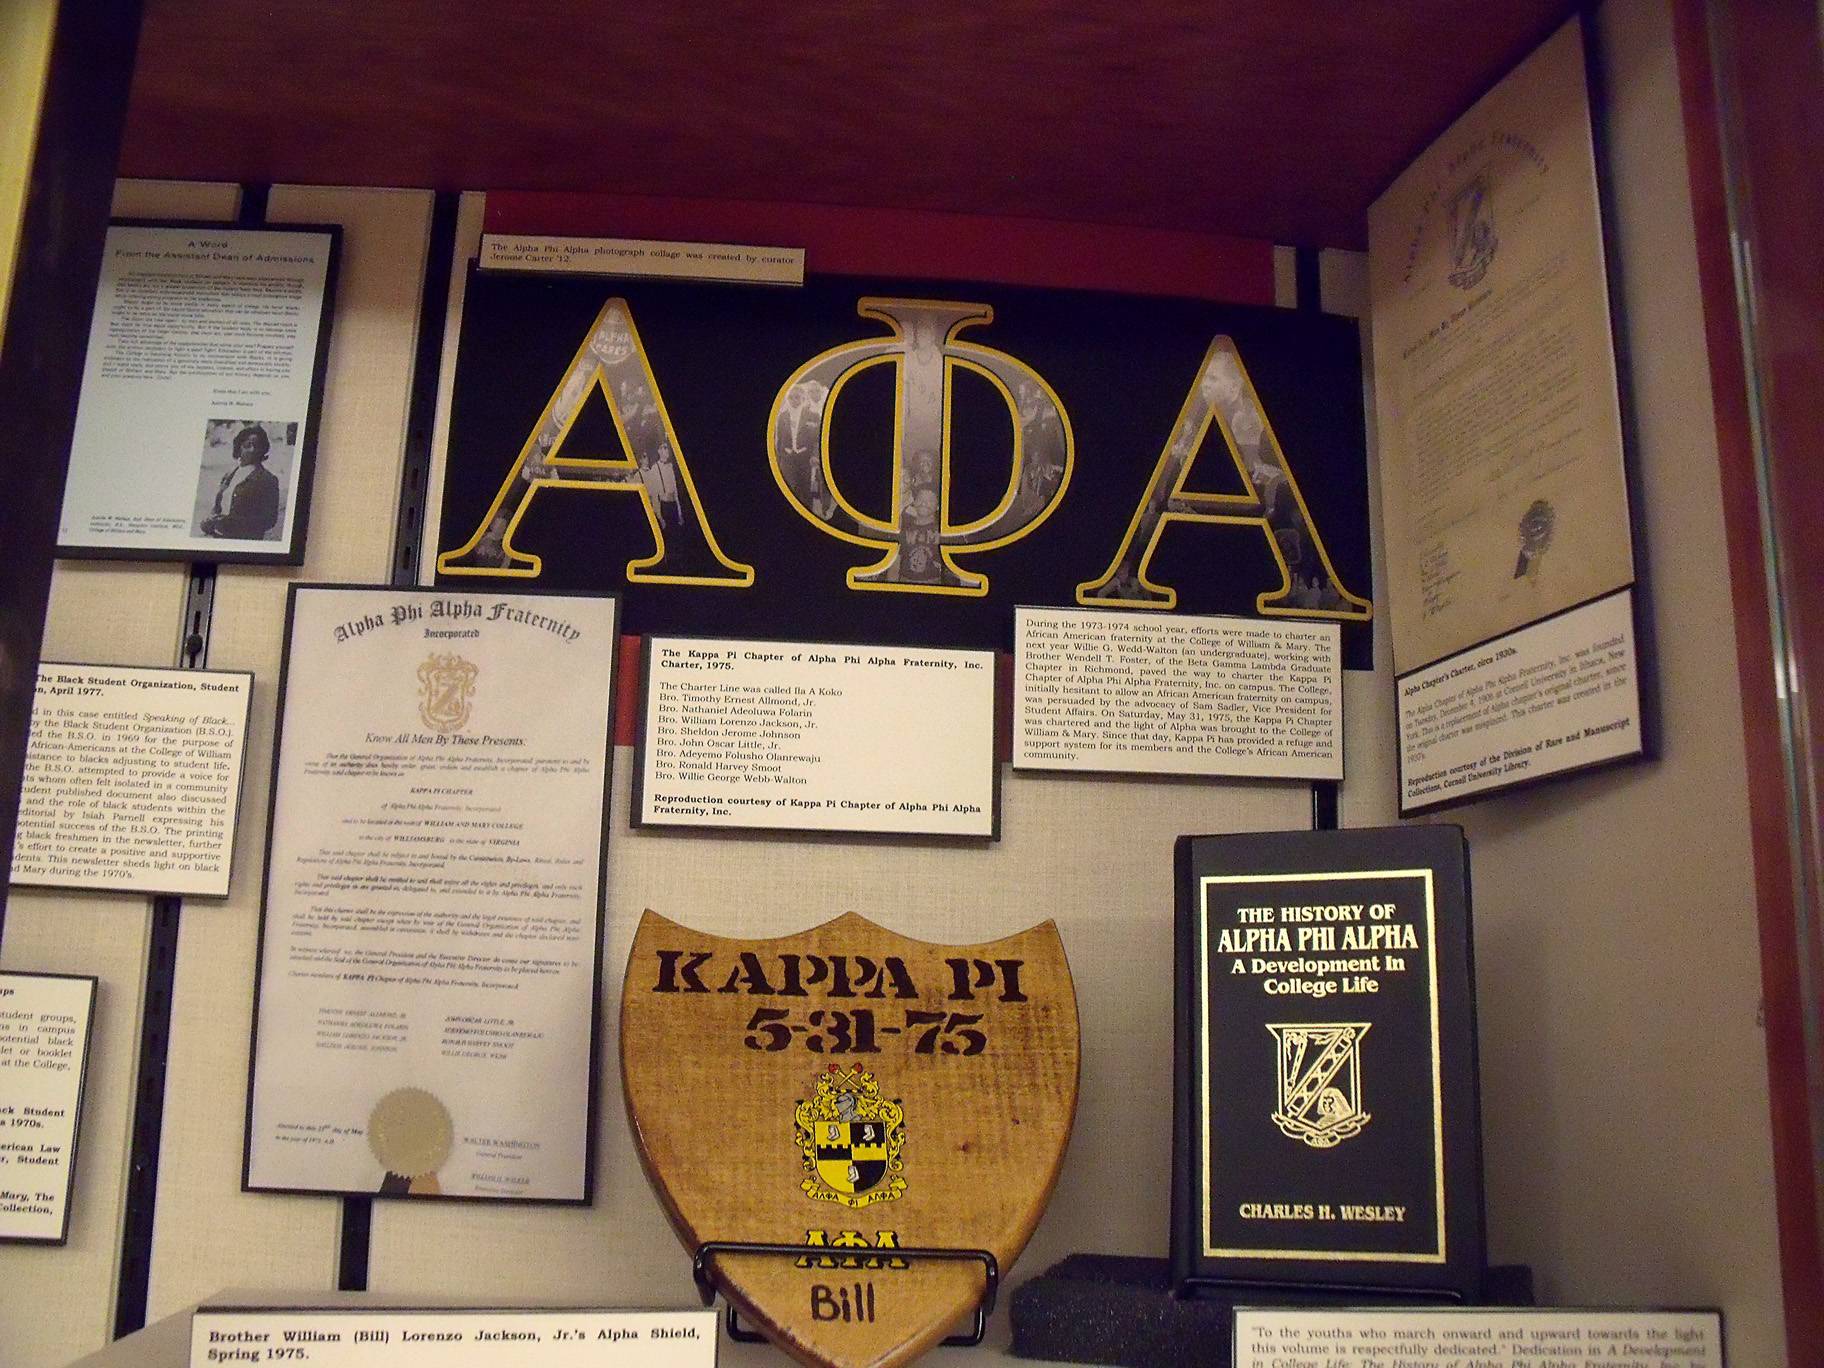 Alpha Phi Alpha Fraternity, Incorporated (1906) - Founded at Cornell University, Alpha Phi Alpha Fraternity, Incorporated is credited for being the first intercollegiate fraternity for Black males. Past members include Thurgood Marshall, Martin Luther King, Jr. and Jesse Owens.(Photo: Creative Commons via Flickr.com/scrc)